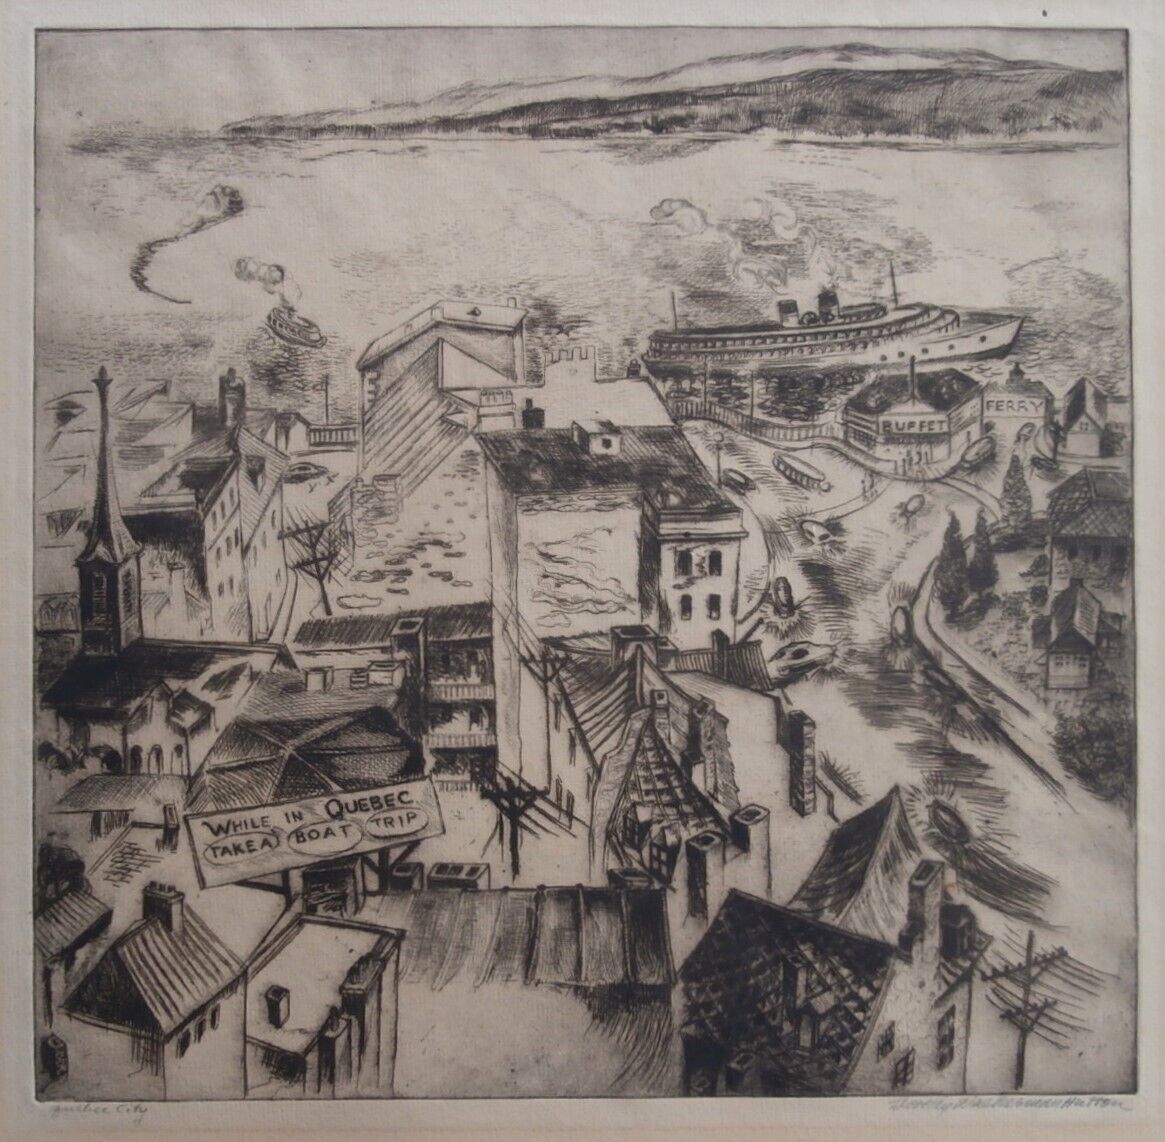 PA Woman MODERNIST Artist DOROTHY W. HUTTON ca 1945 Canada Etching QUEBEC CITY 